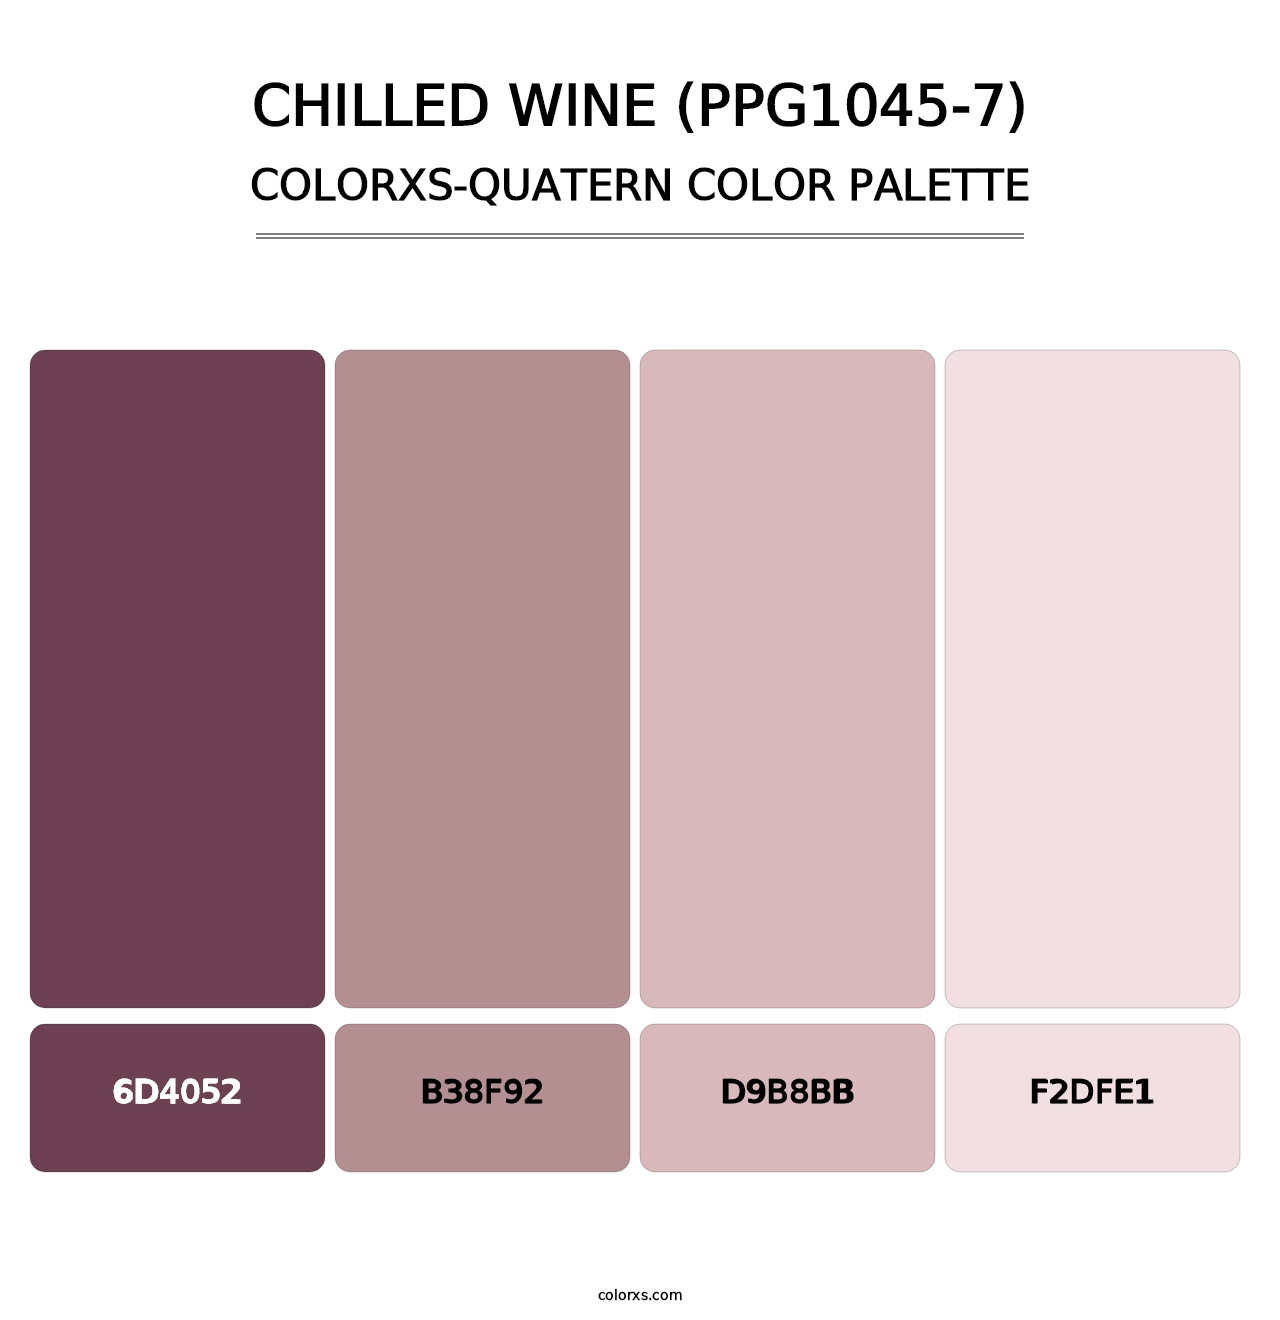 Chilled Wine (PPG1045-7) - Colorxs Quatern Palette